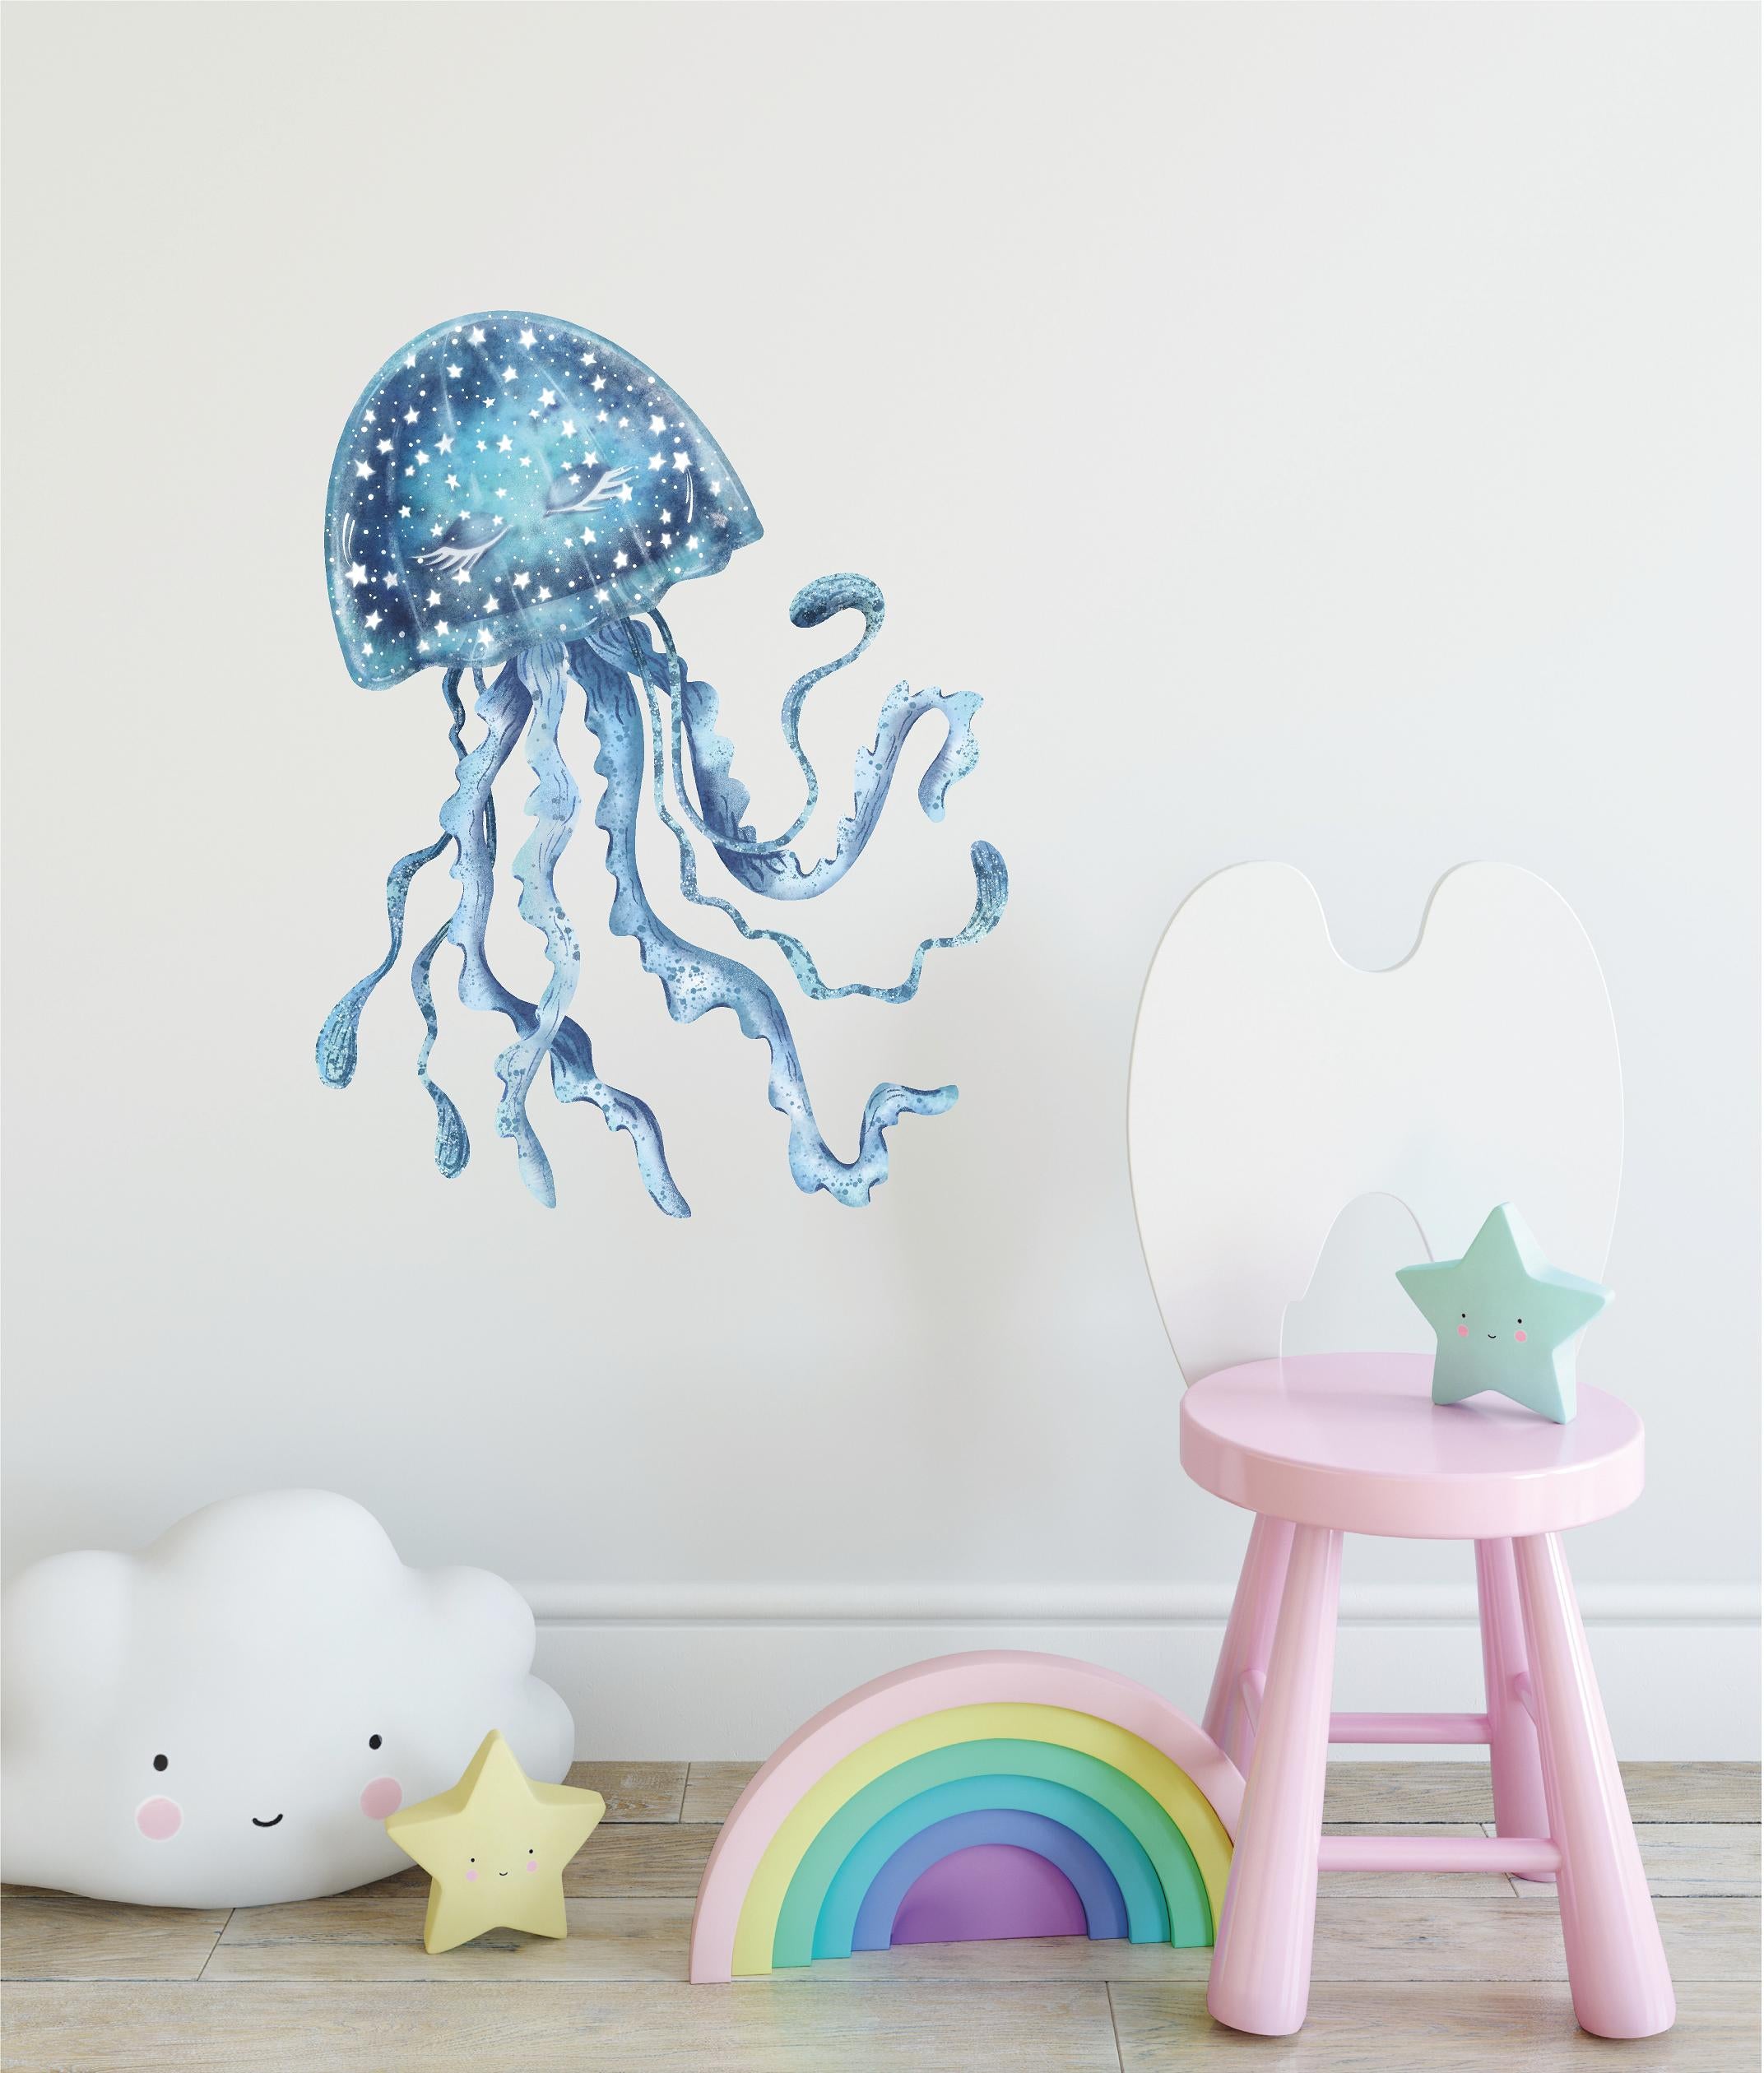 Sleepy Star Jellyfish Wall Decal Removable Fabric Vinyl Watercolor Ocean Sea Animal Whimsical Wall Sticker | DecalBaby